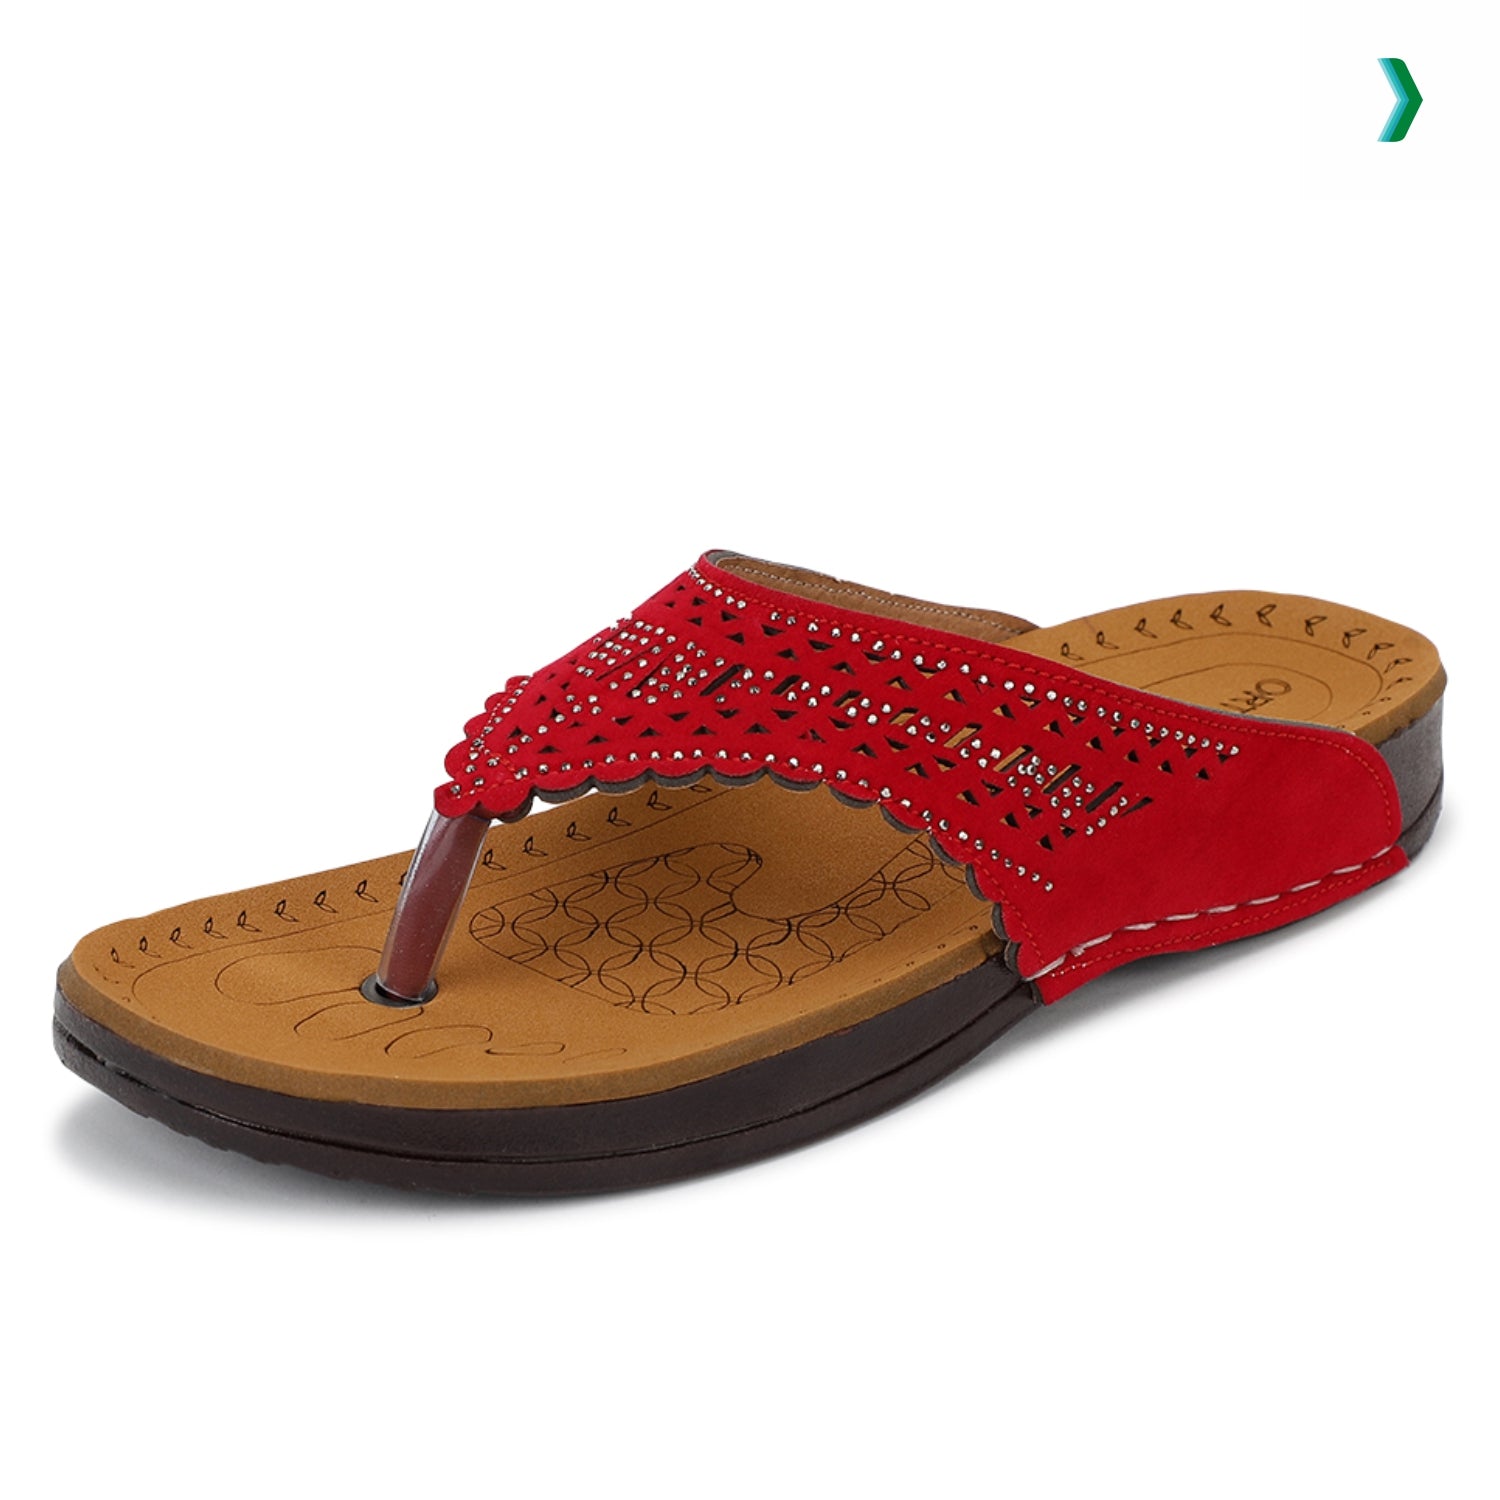 doctor chappal for ladies, orthopedic slippers for women, ortho slippers, ortho slippers for ladies, dr ortho slippers, dr ortho slippers for ladies, ortho rest slippers, ortho chappal for ladies, best orthopedic slippers for women